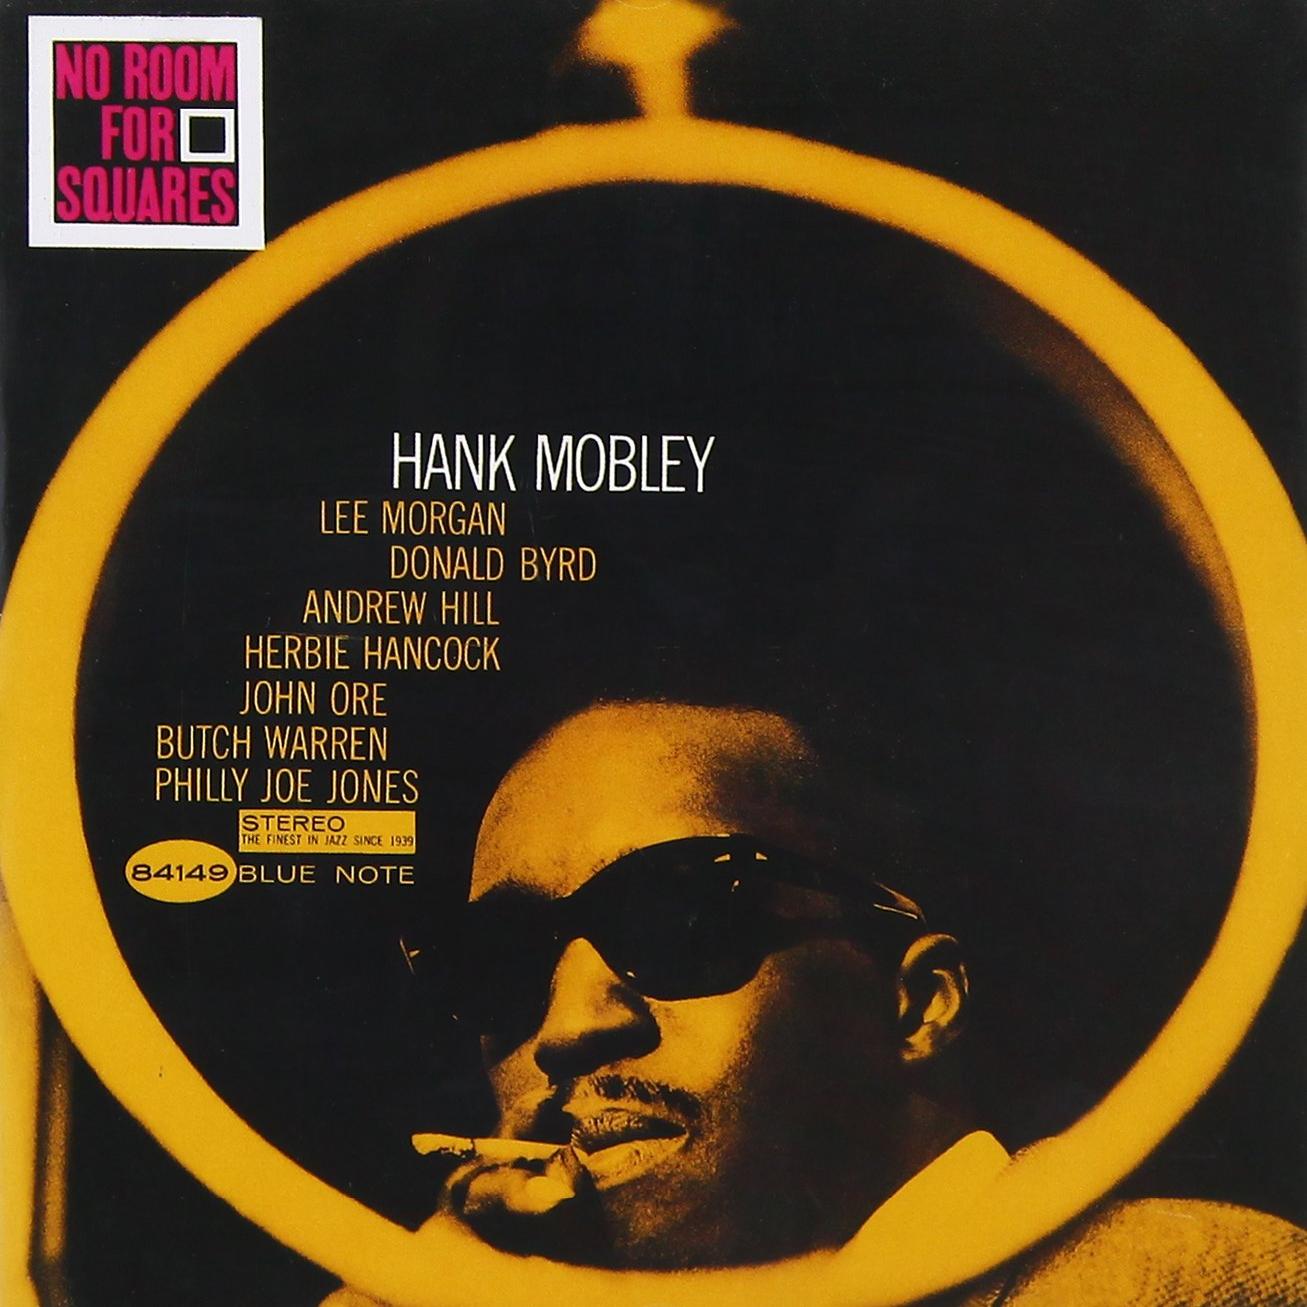 Hank Mobley - No Room For Squares (1964)